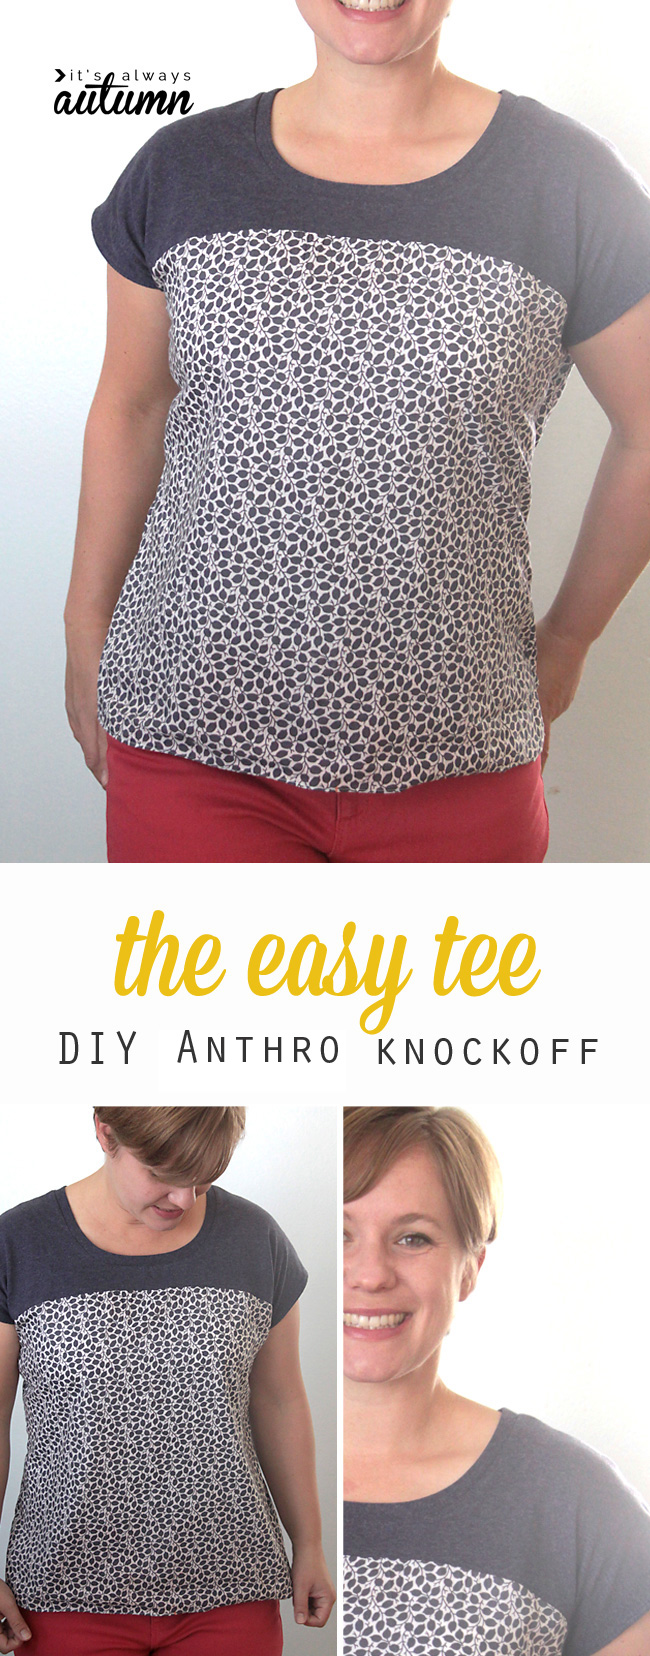 Use the included free pattern to make this easy to sew Anthropologie knockoff women's shirt.